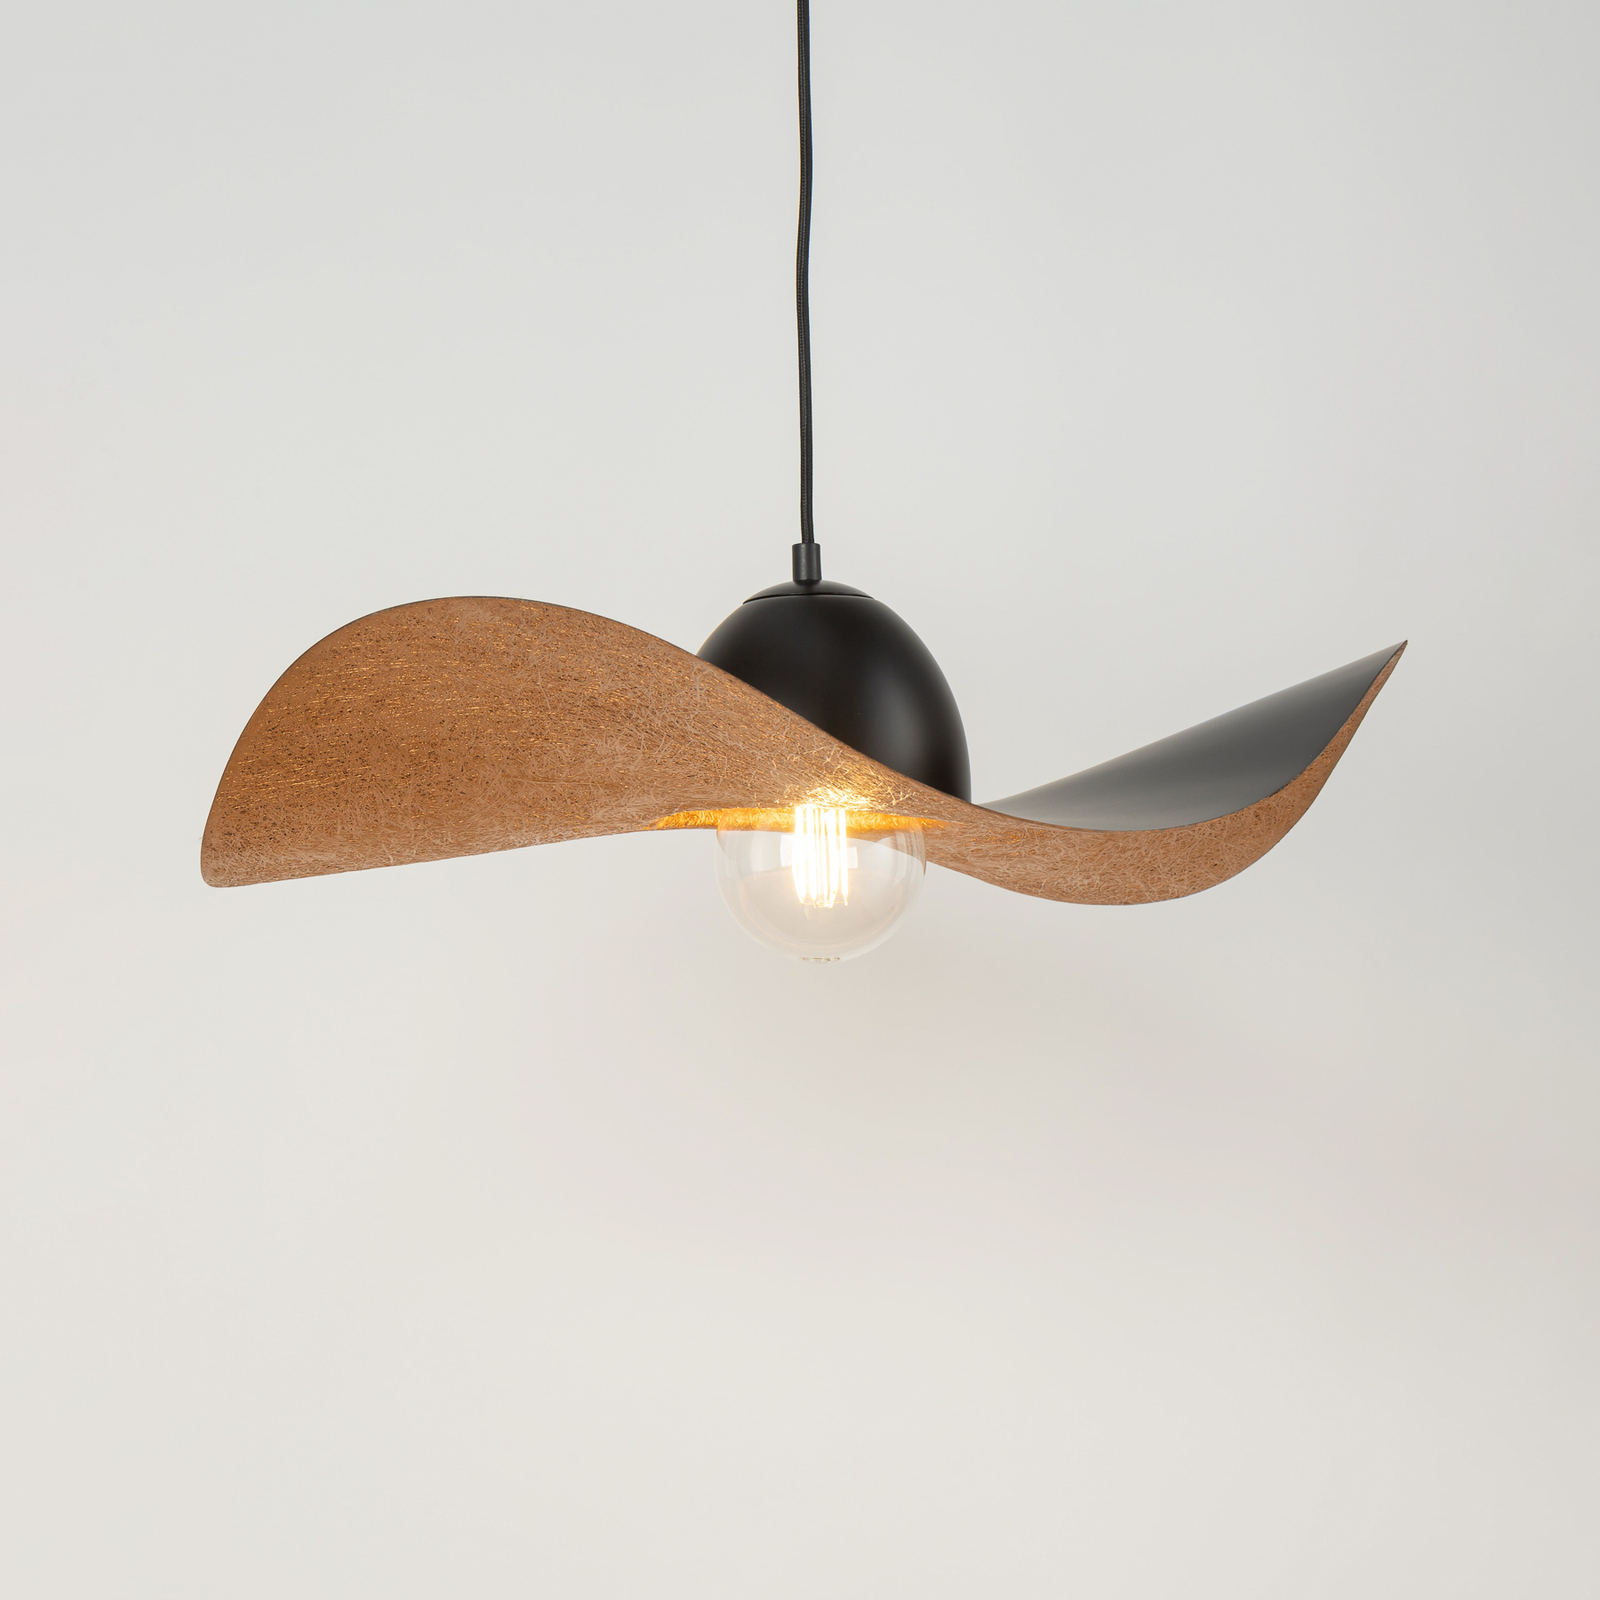 Jil hanging light, curved lampshade, black/copper